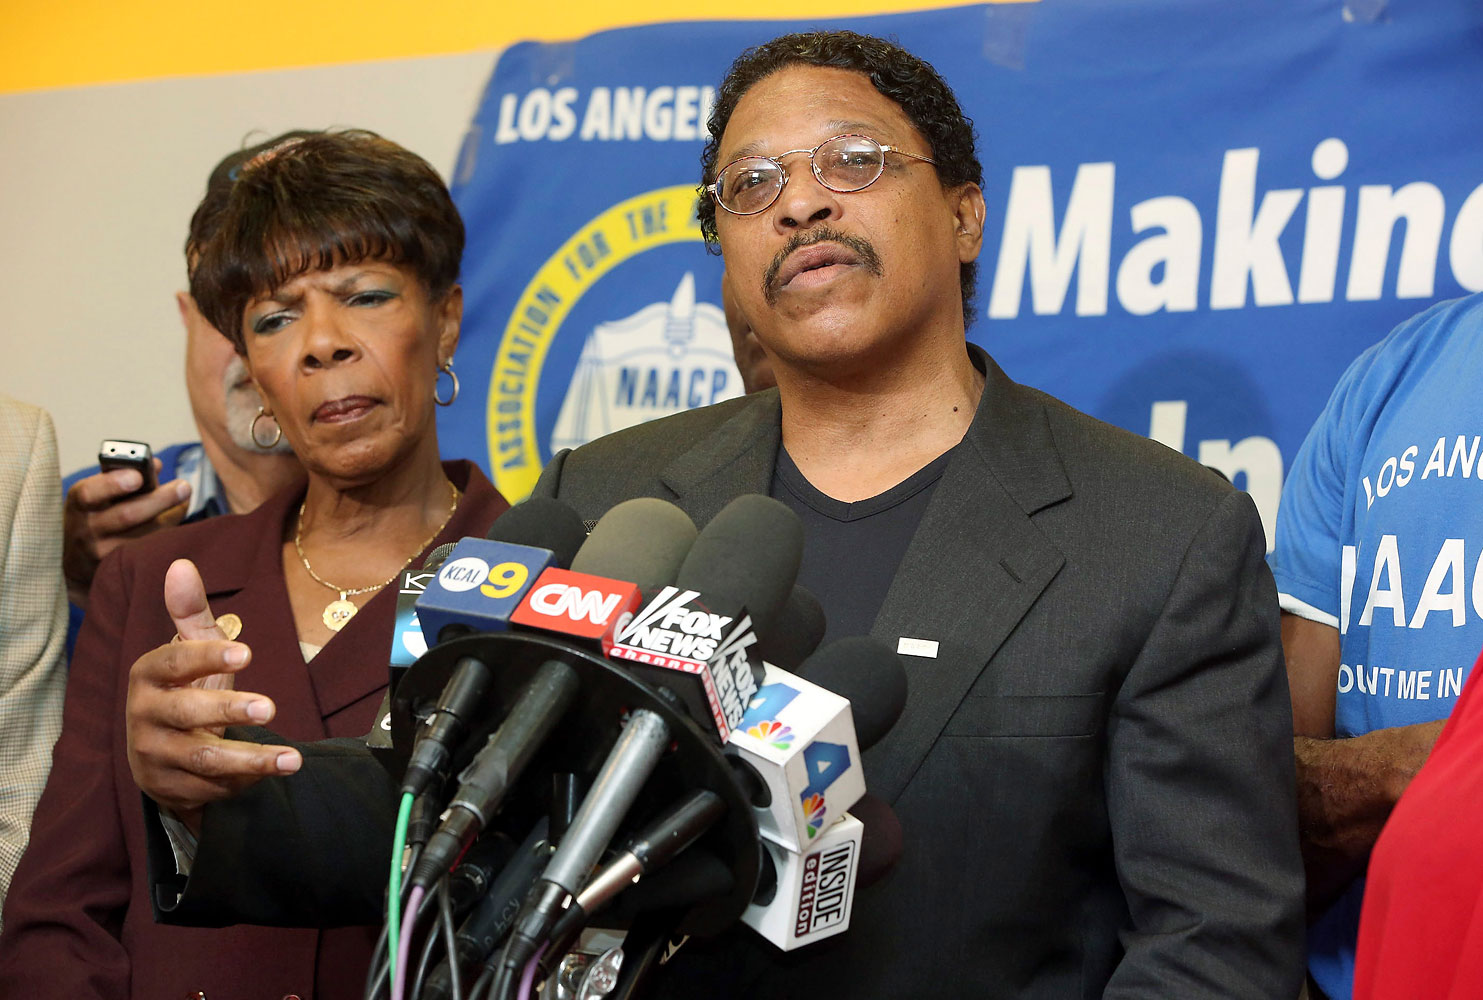 Leon Jenkins, right, president of the Los Angeles chapter of the NAACP, announces that Los Angeles Clippers owner Donald Sterling will not be receiving his lifetime achievement award, at a news conference in Culver City, Calif., April 28, 2014. 